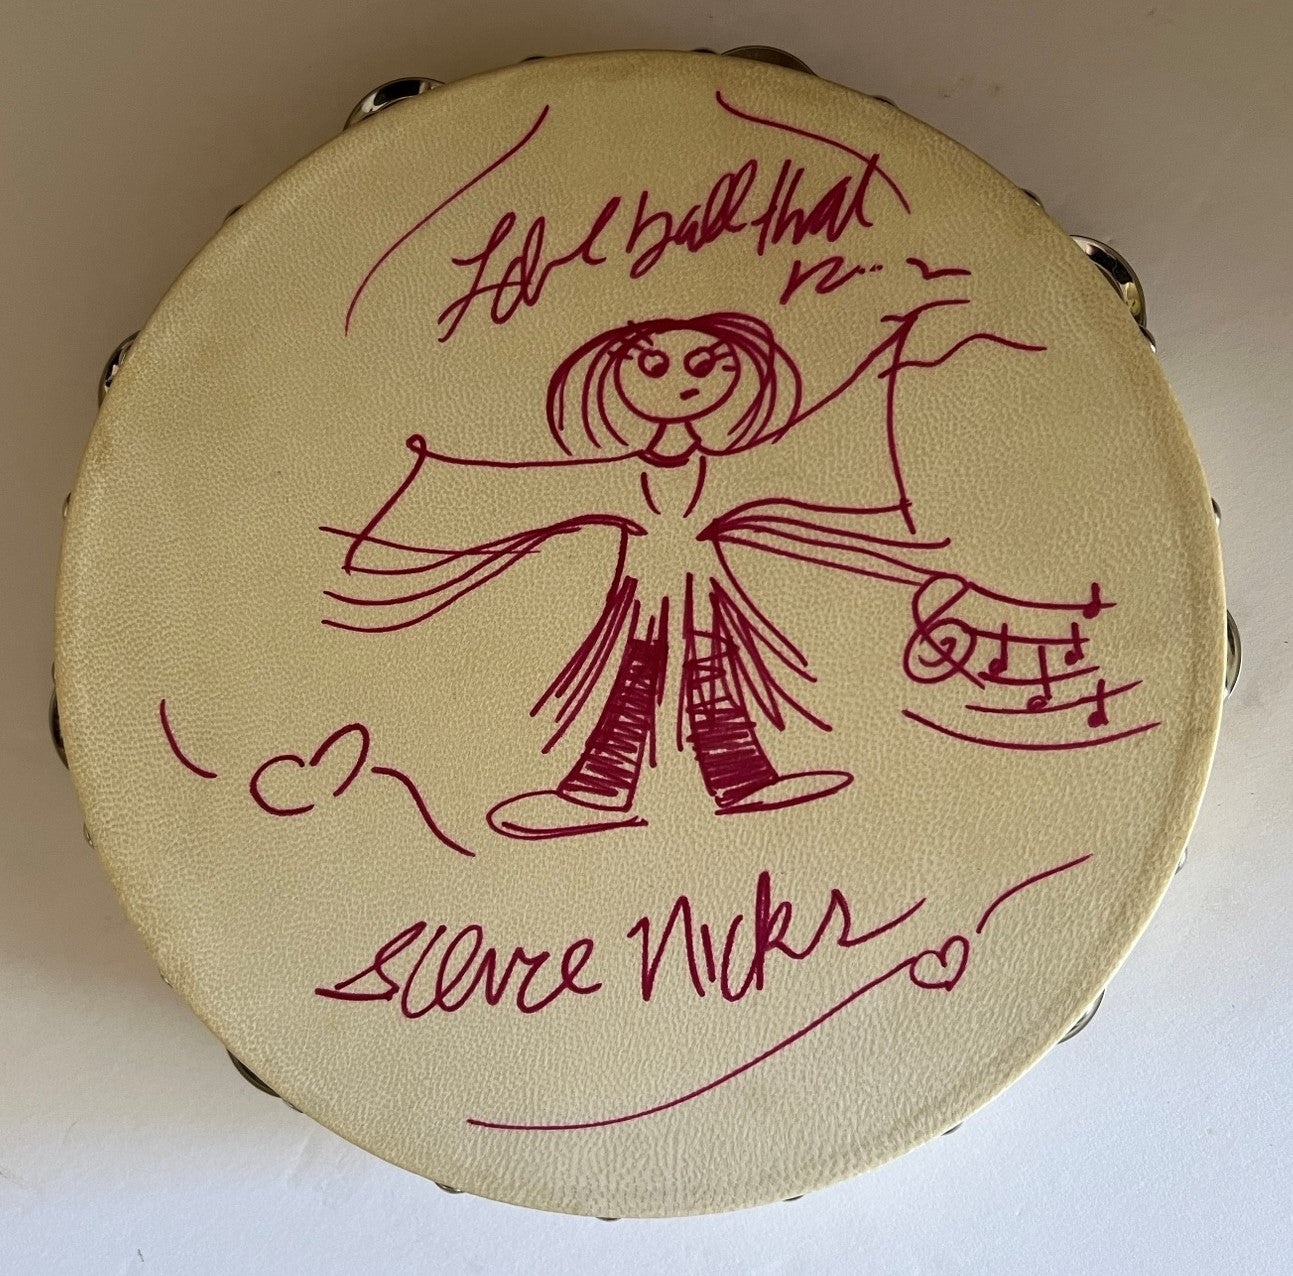 Stevie Nicks tambourine signed and sketched